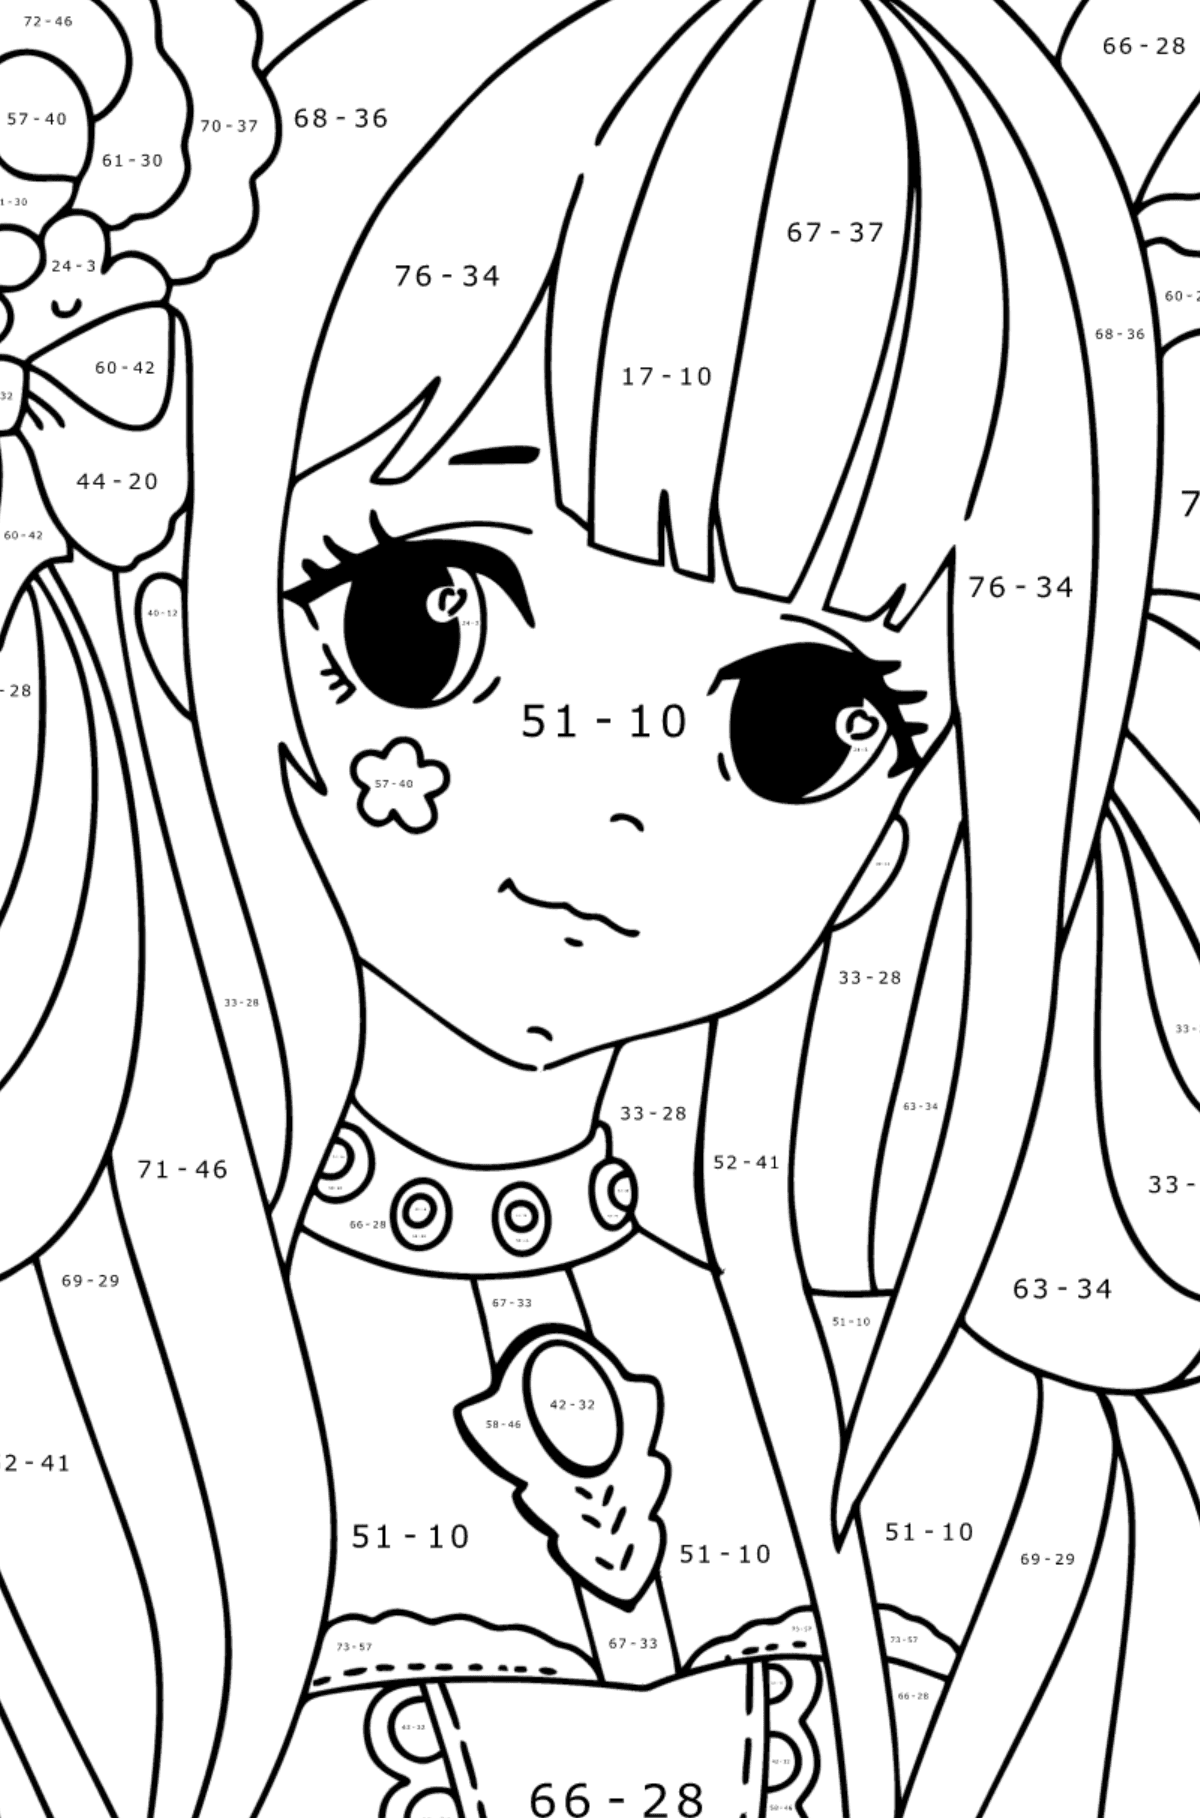 Girl face coloring page - Math Coloring - Subtraction for Kids